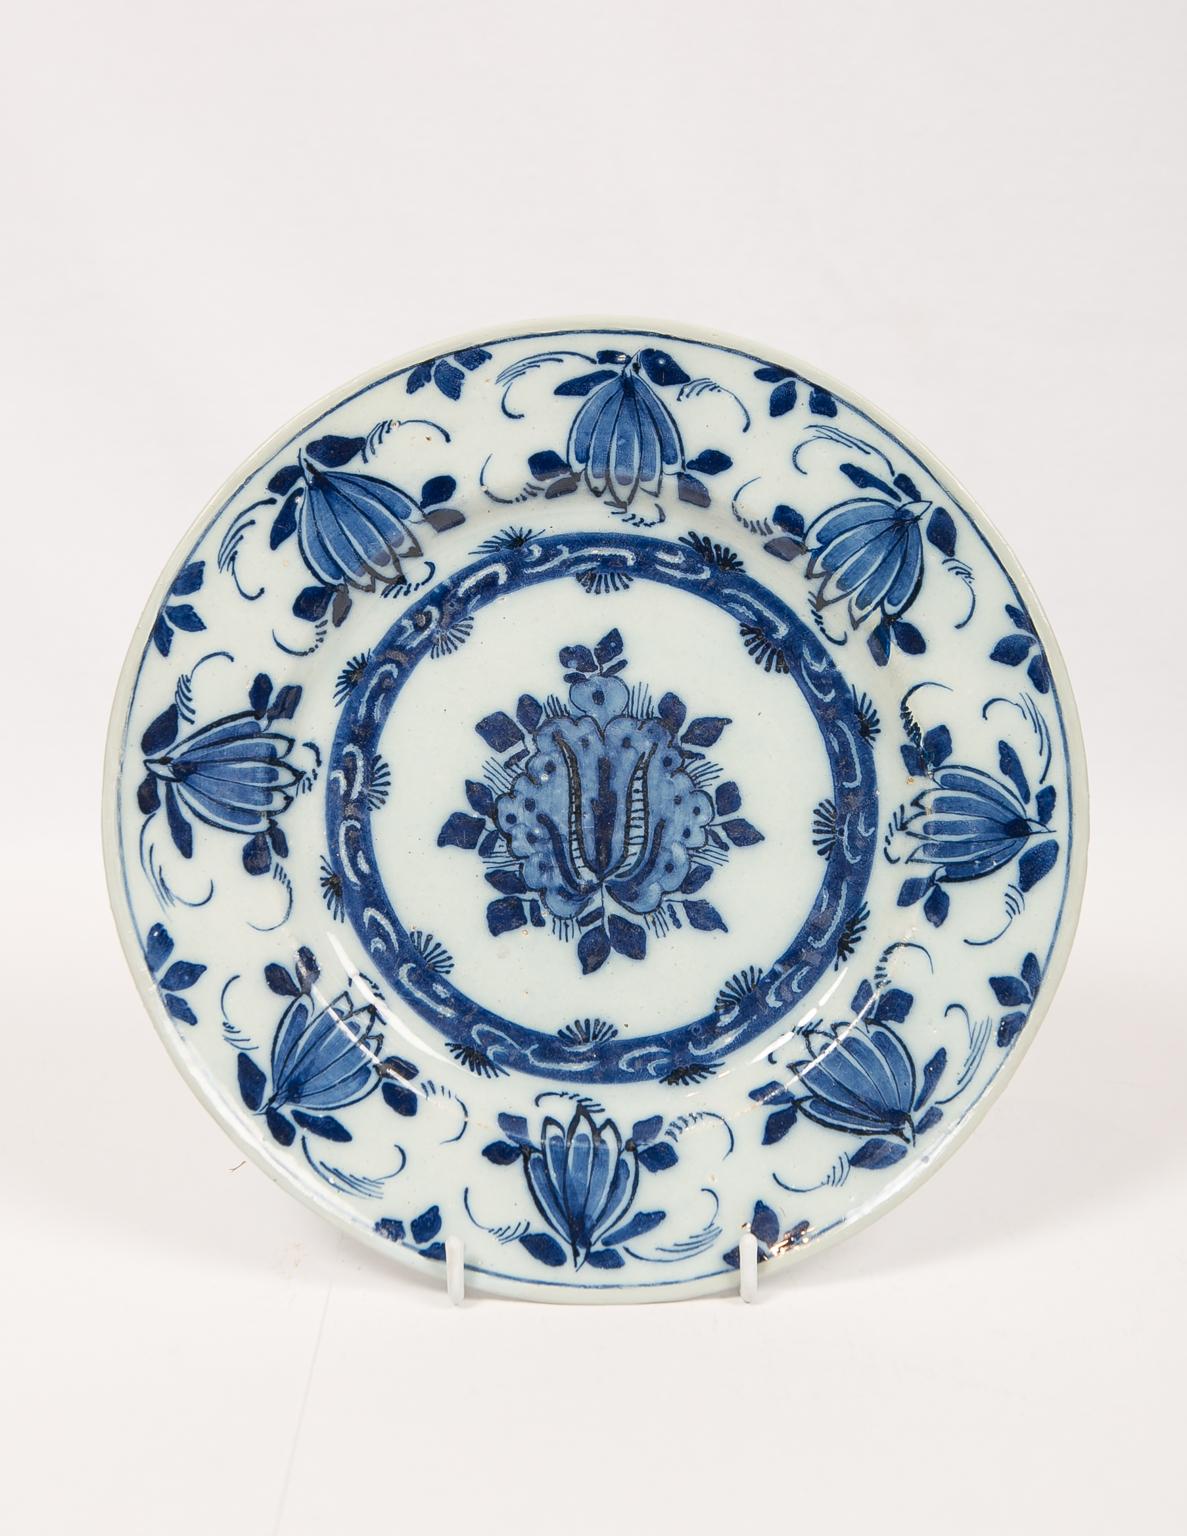 Eleven hand-painted Blue and White Dutch Delft dishes.
Shown here are Delft dishes from our large collection of antique Blue and White Delft. All are in stock. These dishes would look great hung on a wall, in a cabinet, or placed on a table.
     